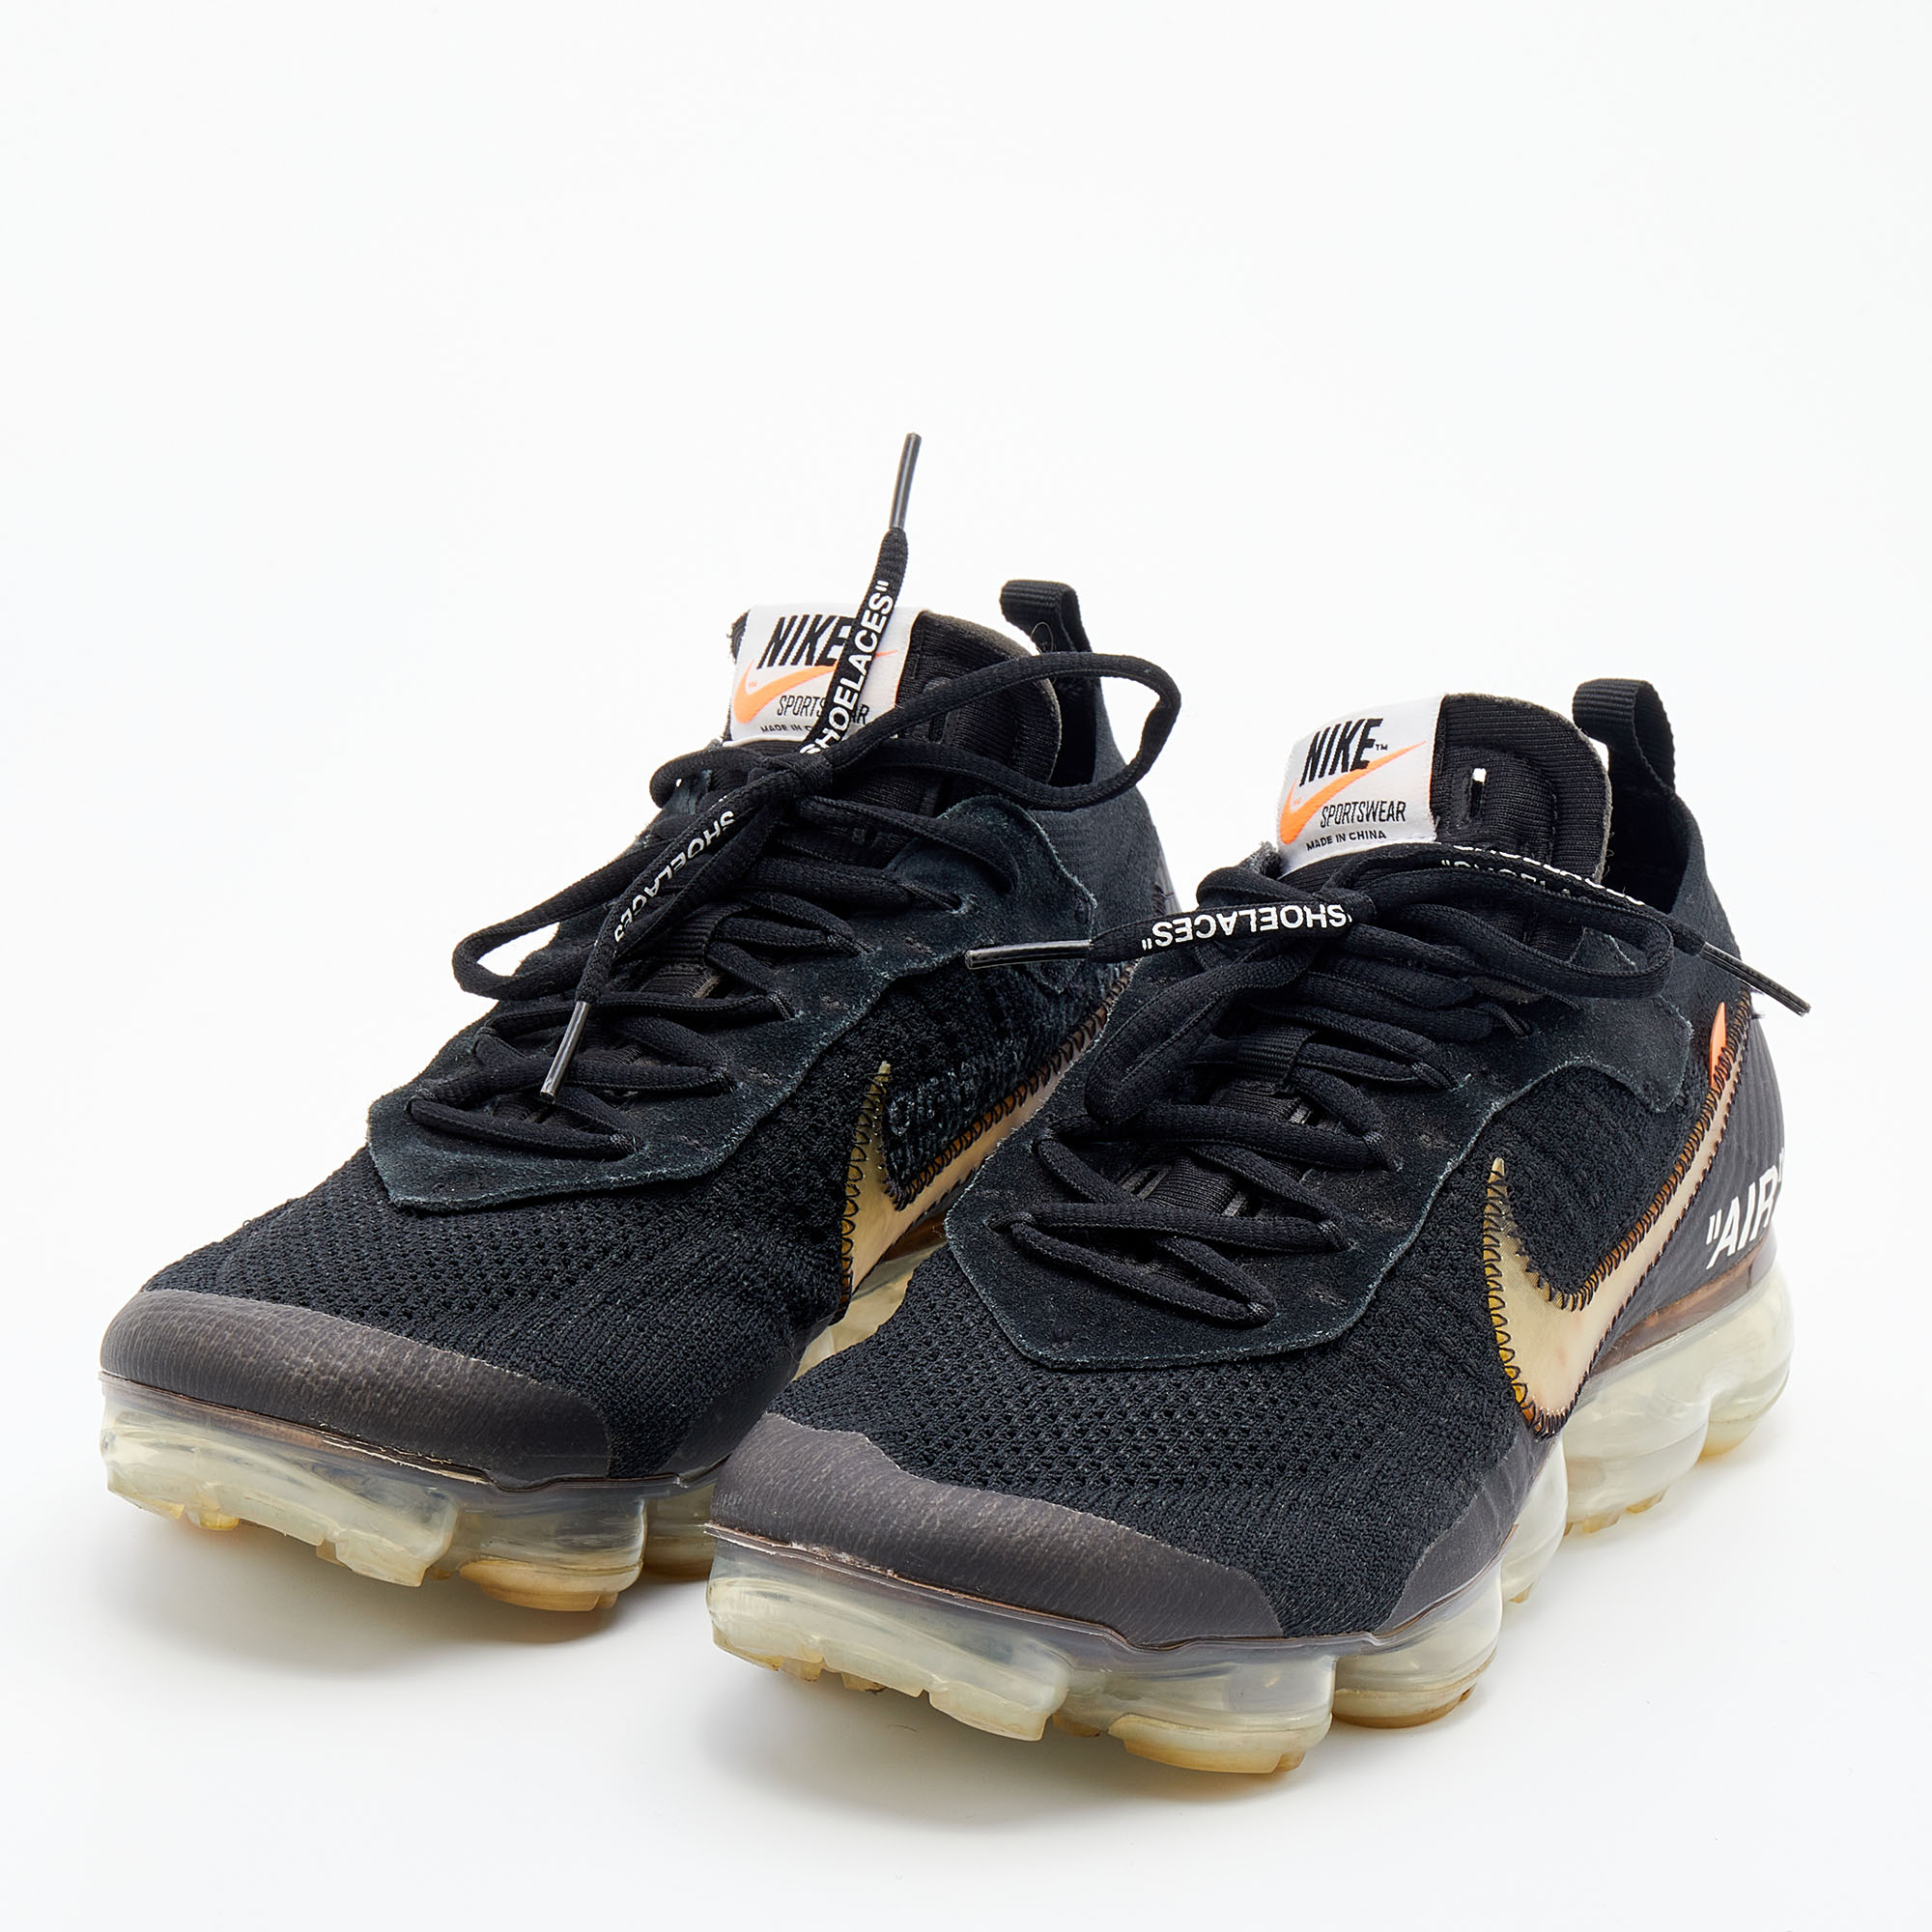 

Nike x Off White Black Knit Fabric And Suede Air Vapormax Flyknit Sneakers Size